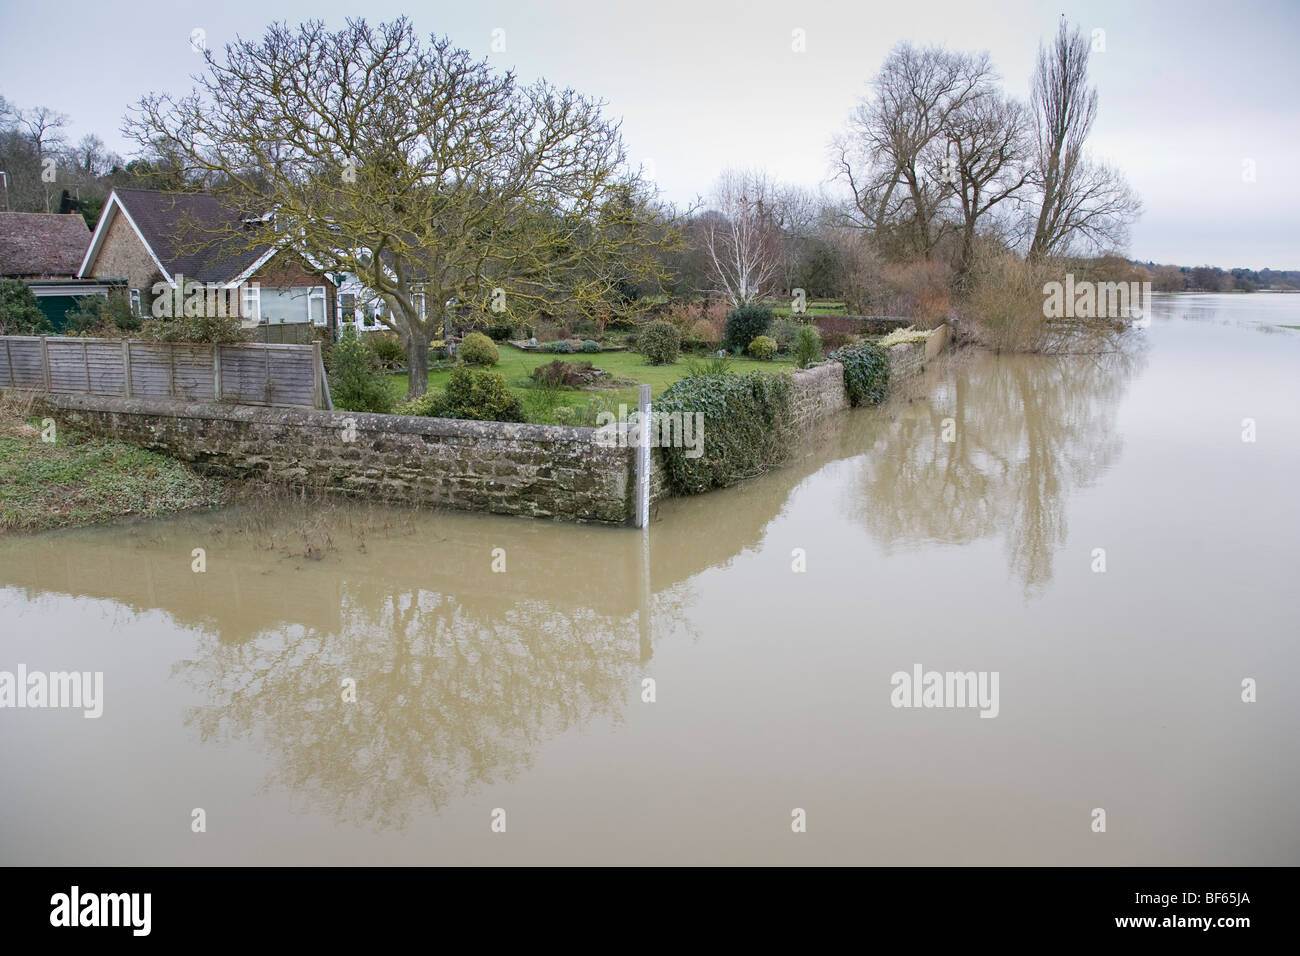 Houses and gardens sit precariously alongside the flooded River Arun, Pulborough, West Sussex, England. Stock Photo